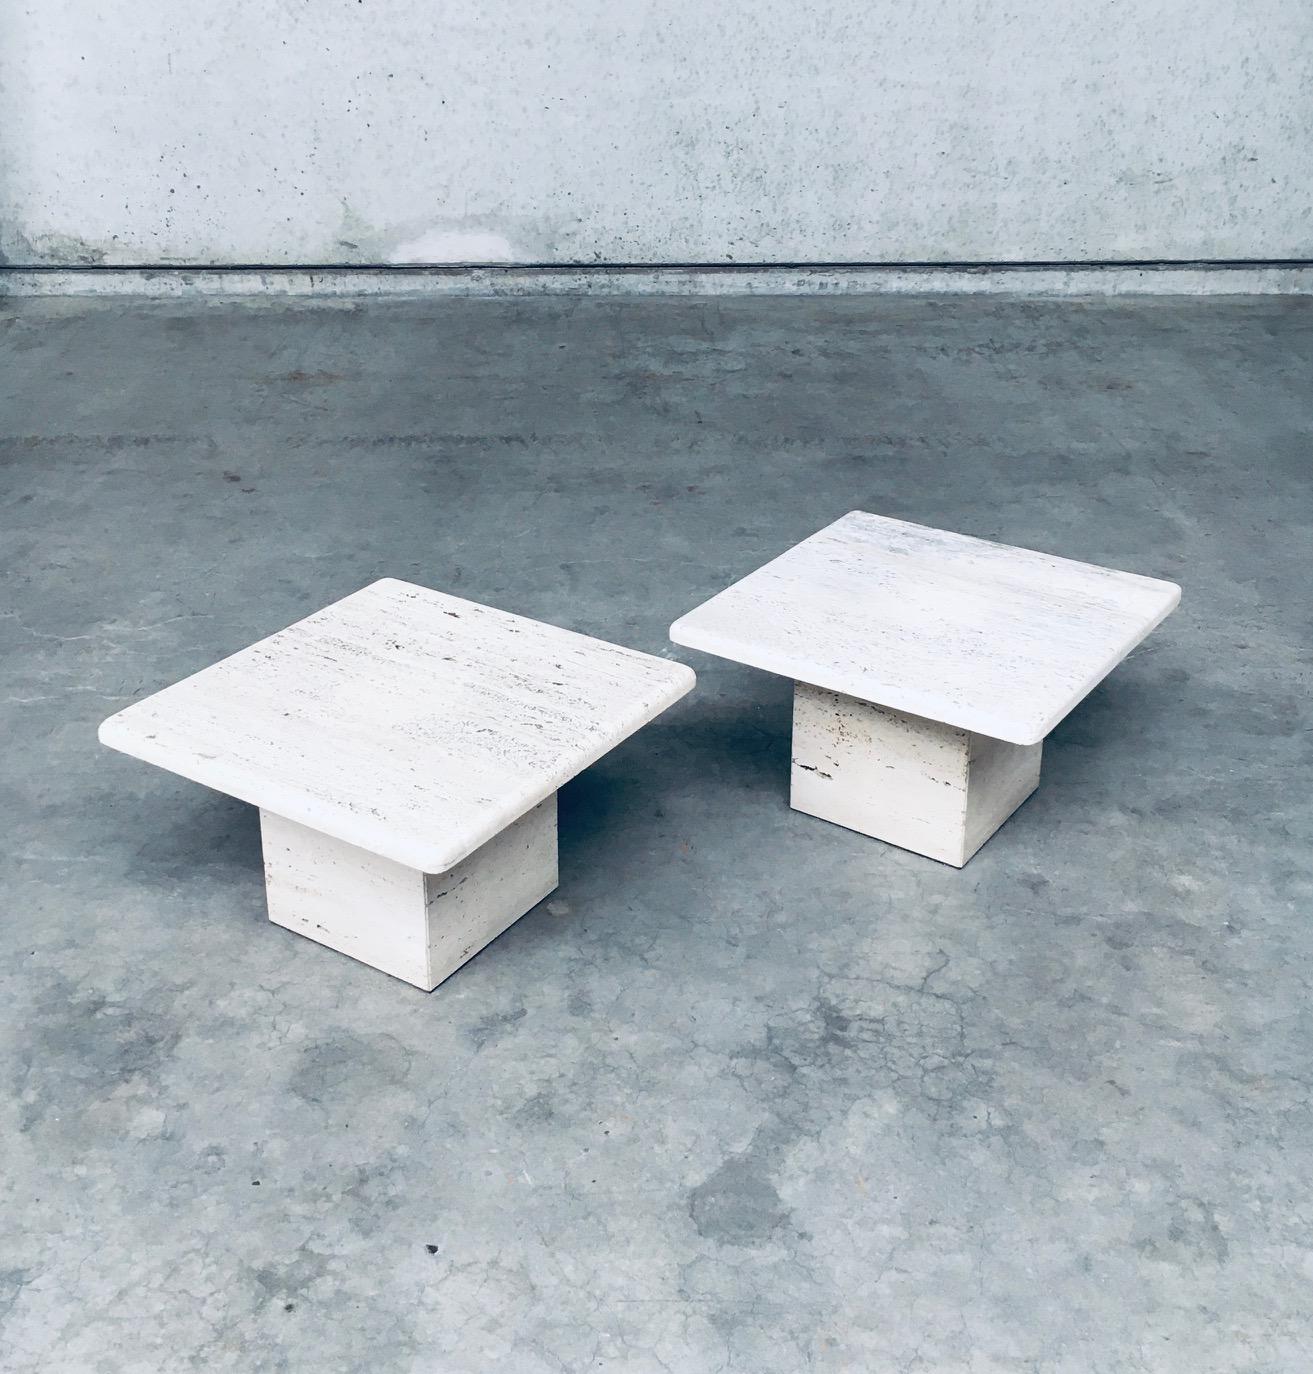 Vintage Midcentury Modern Italian Design Travertine Square Side End Table set of 2. Made in Italy, 1970's. Thick travertine square top with beveled edge supported on a center square travertine base. Classic, elegant and timeless design with